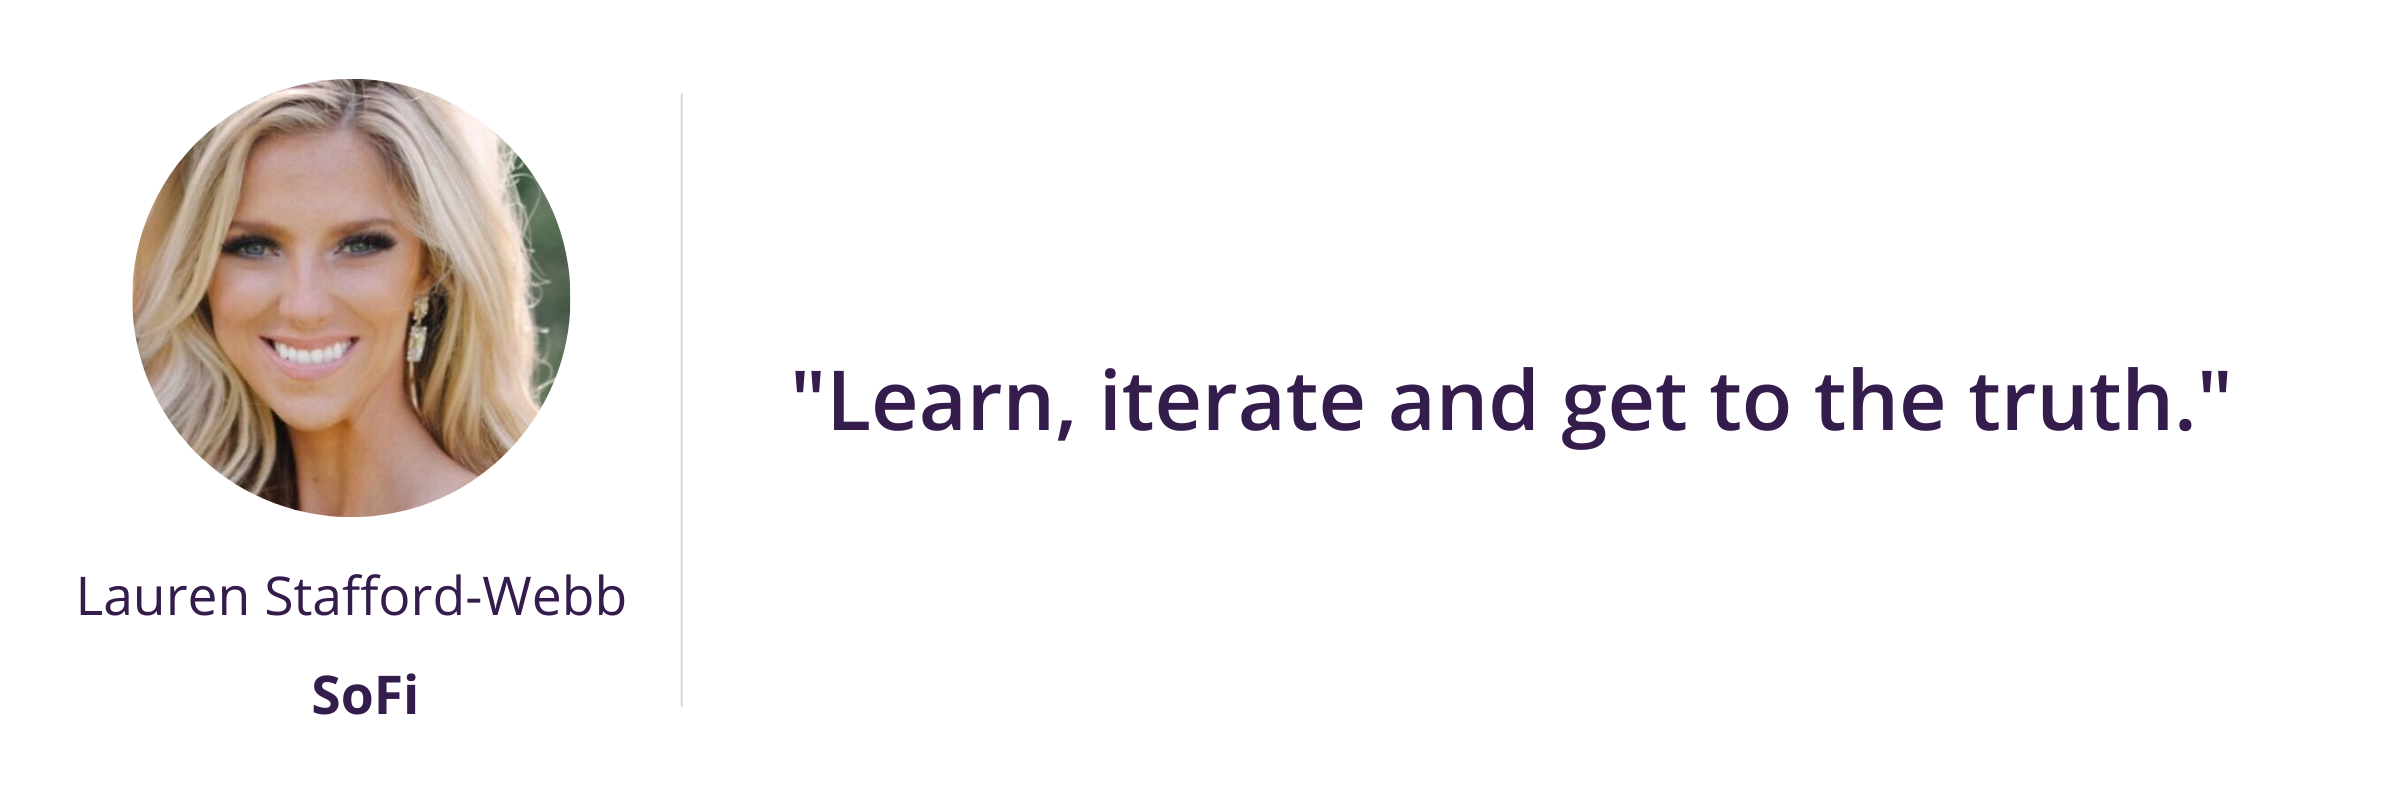 "Learn, iterate and get to the truth."